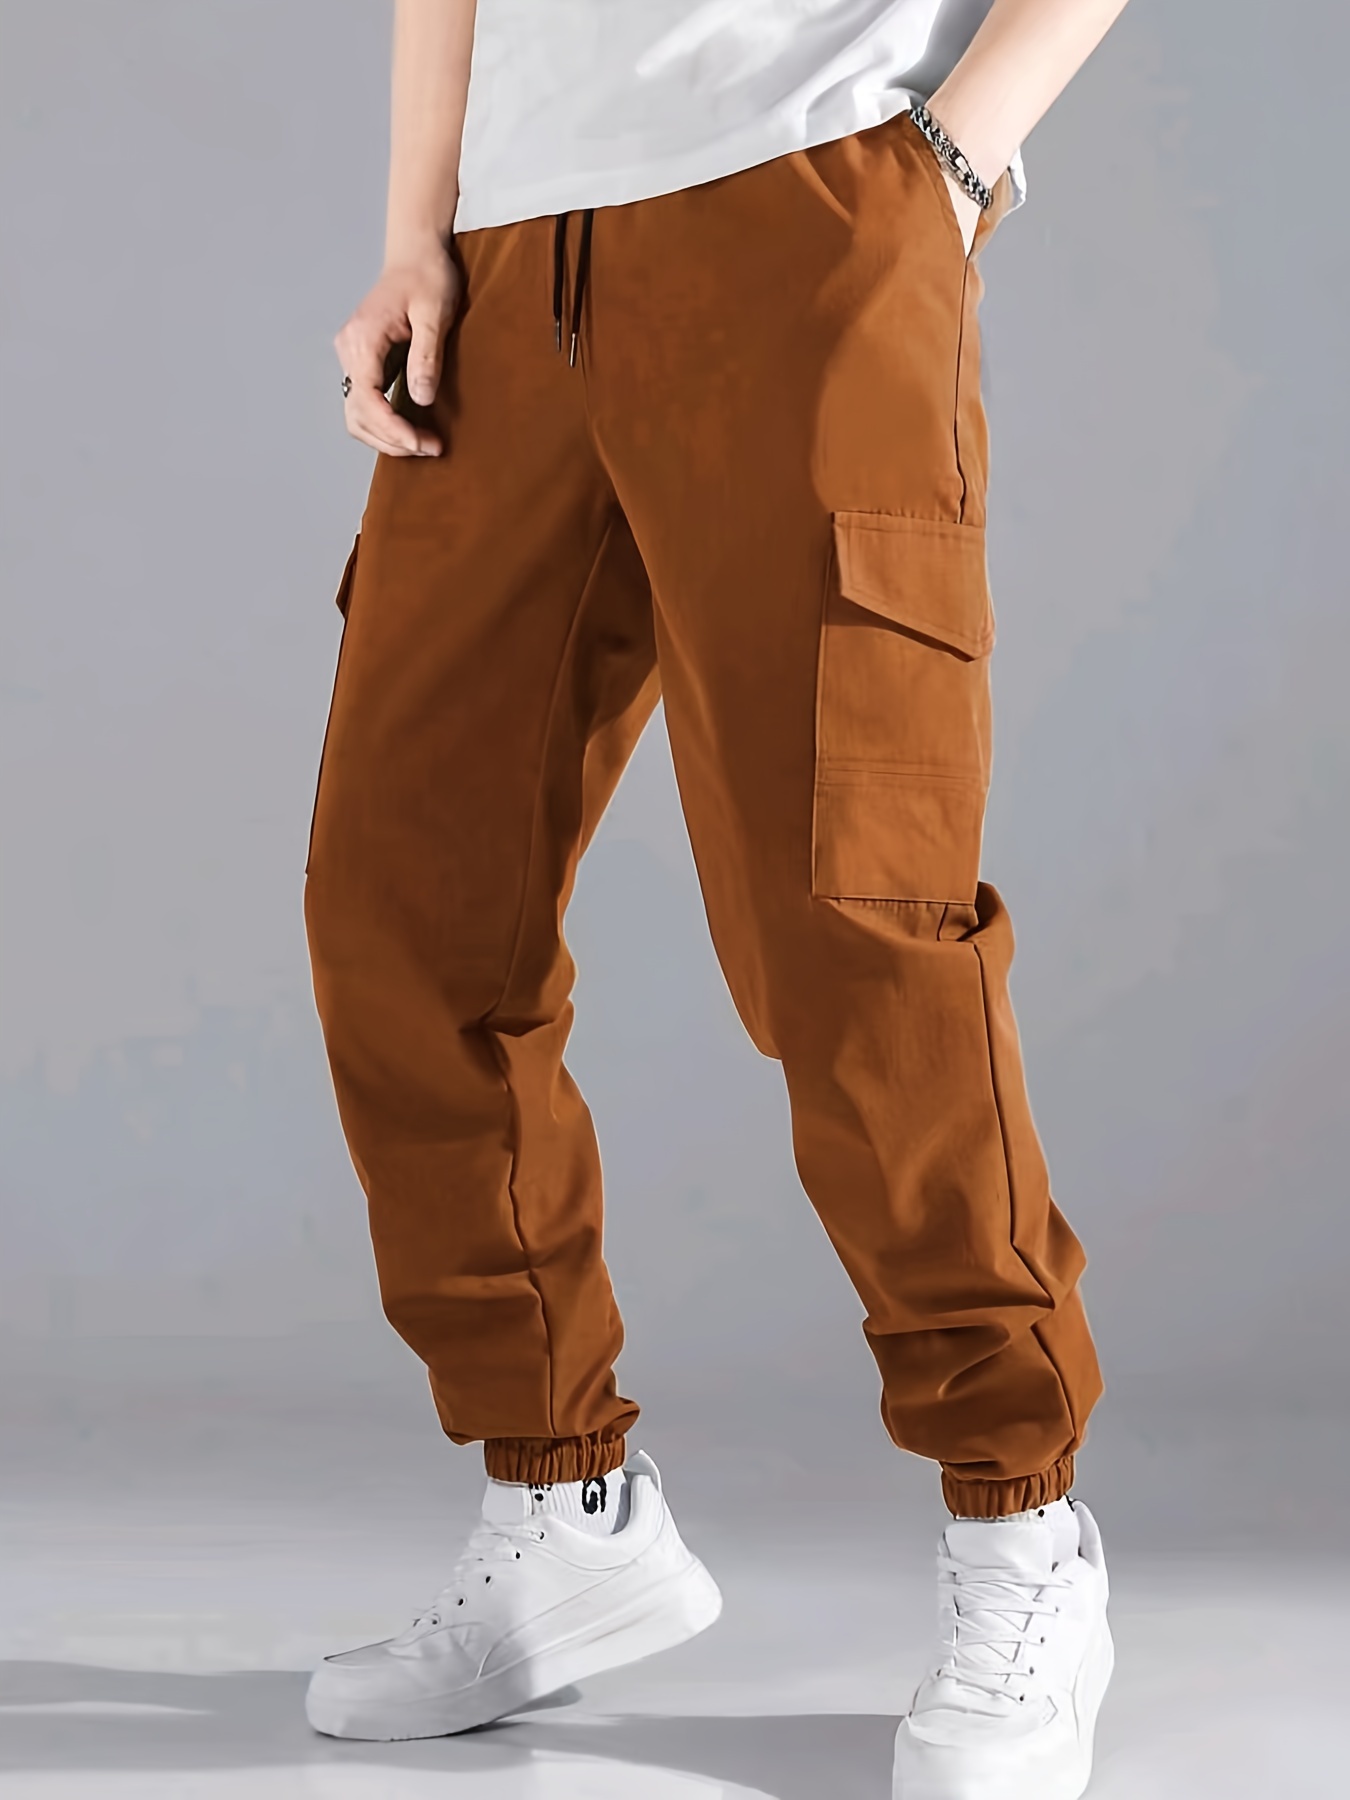 Men's High Stretch Multi-Pocket Skinny Cargo Pants,Outdoor Casual  Drawstring Joggers Pants Cargo Pants Work Pants,Lightweight Fast Dry  Stretch